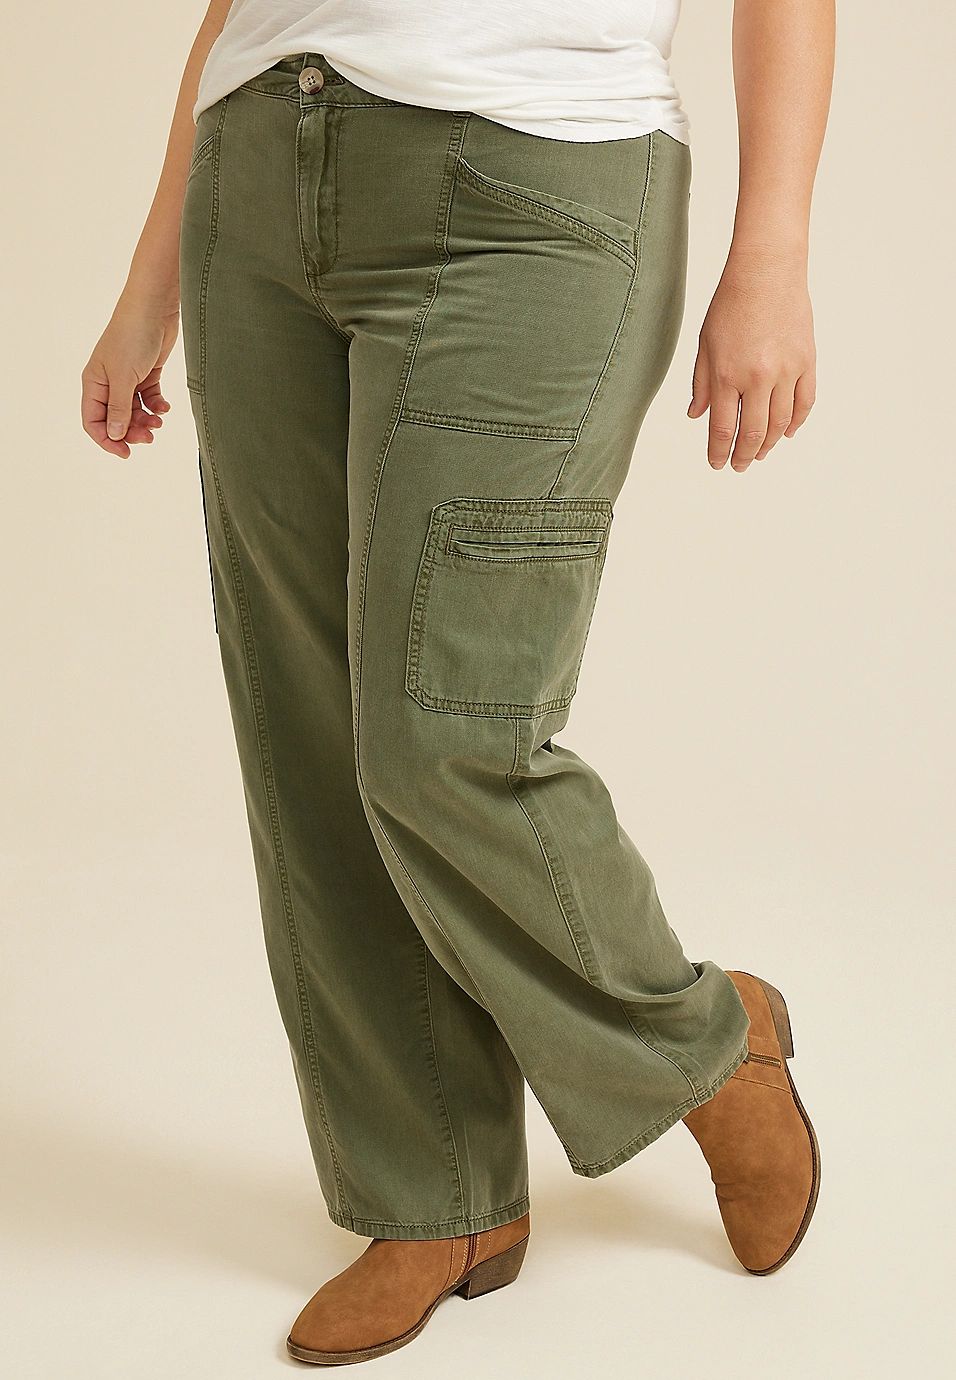 Plus Size Going Places Utility Pant | Maurices